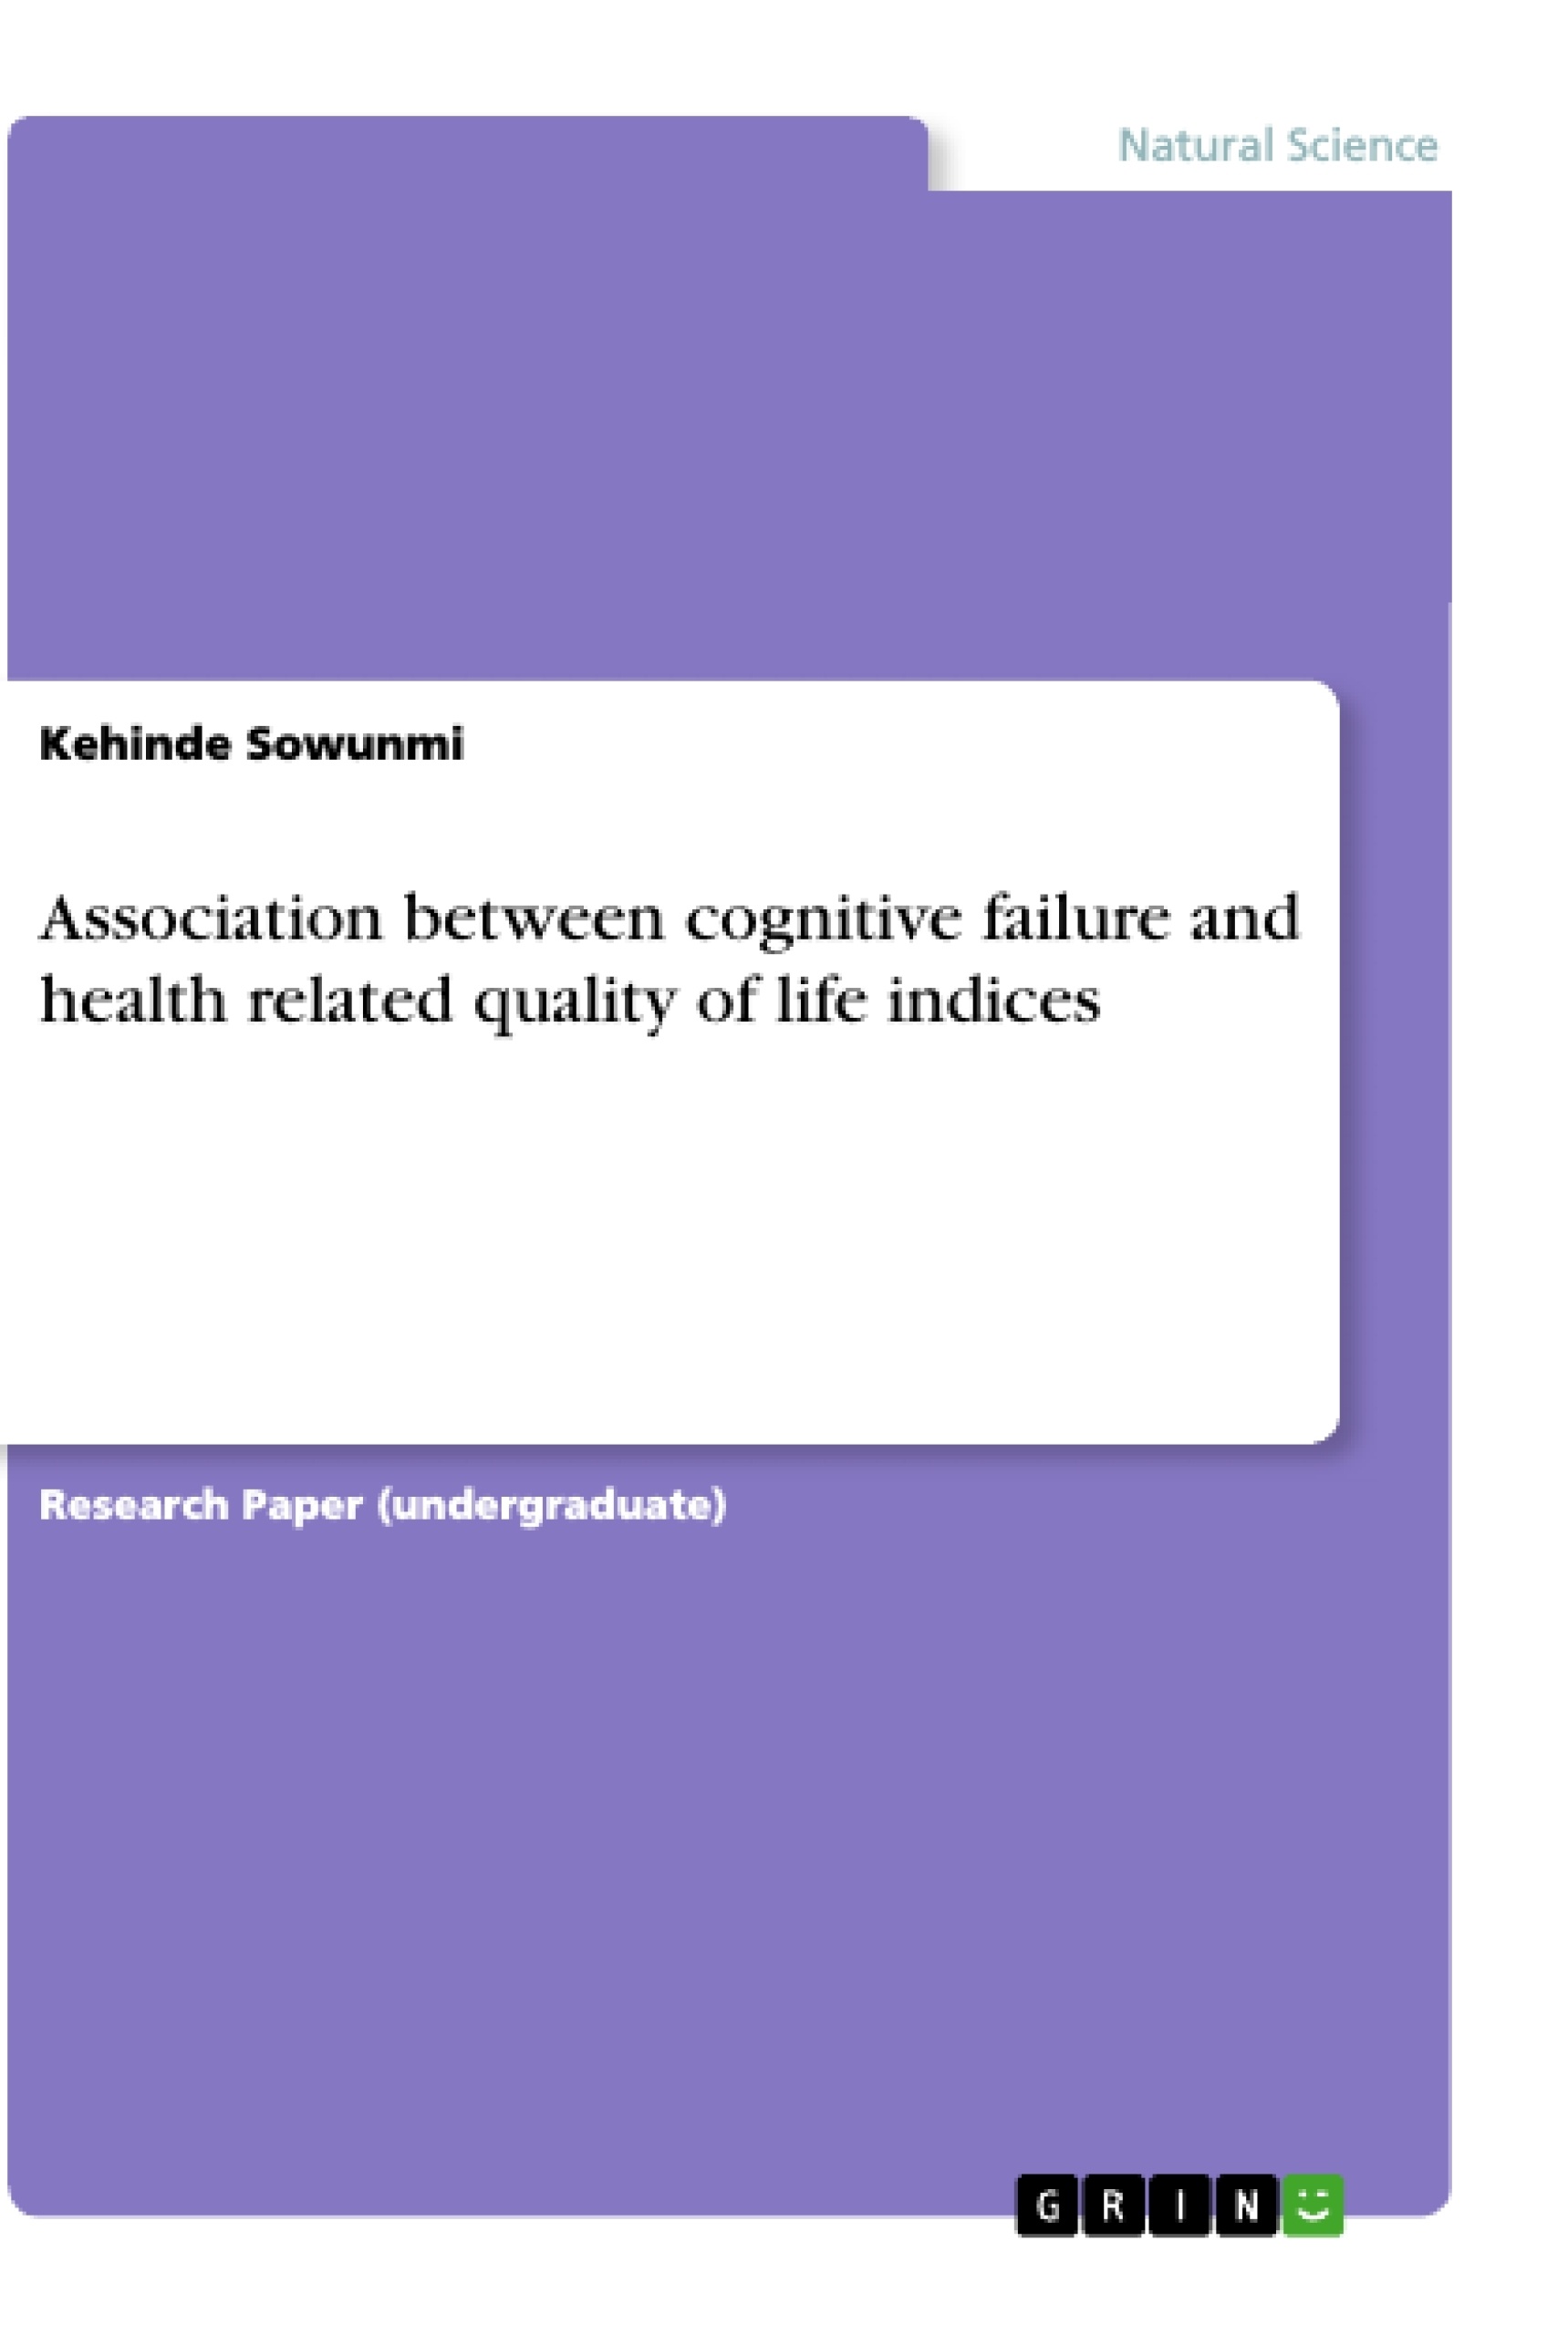 Title: Association between cognitive failure and health related quality of life indices